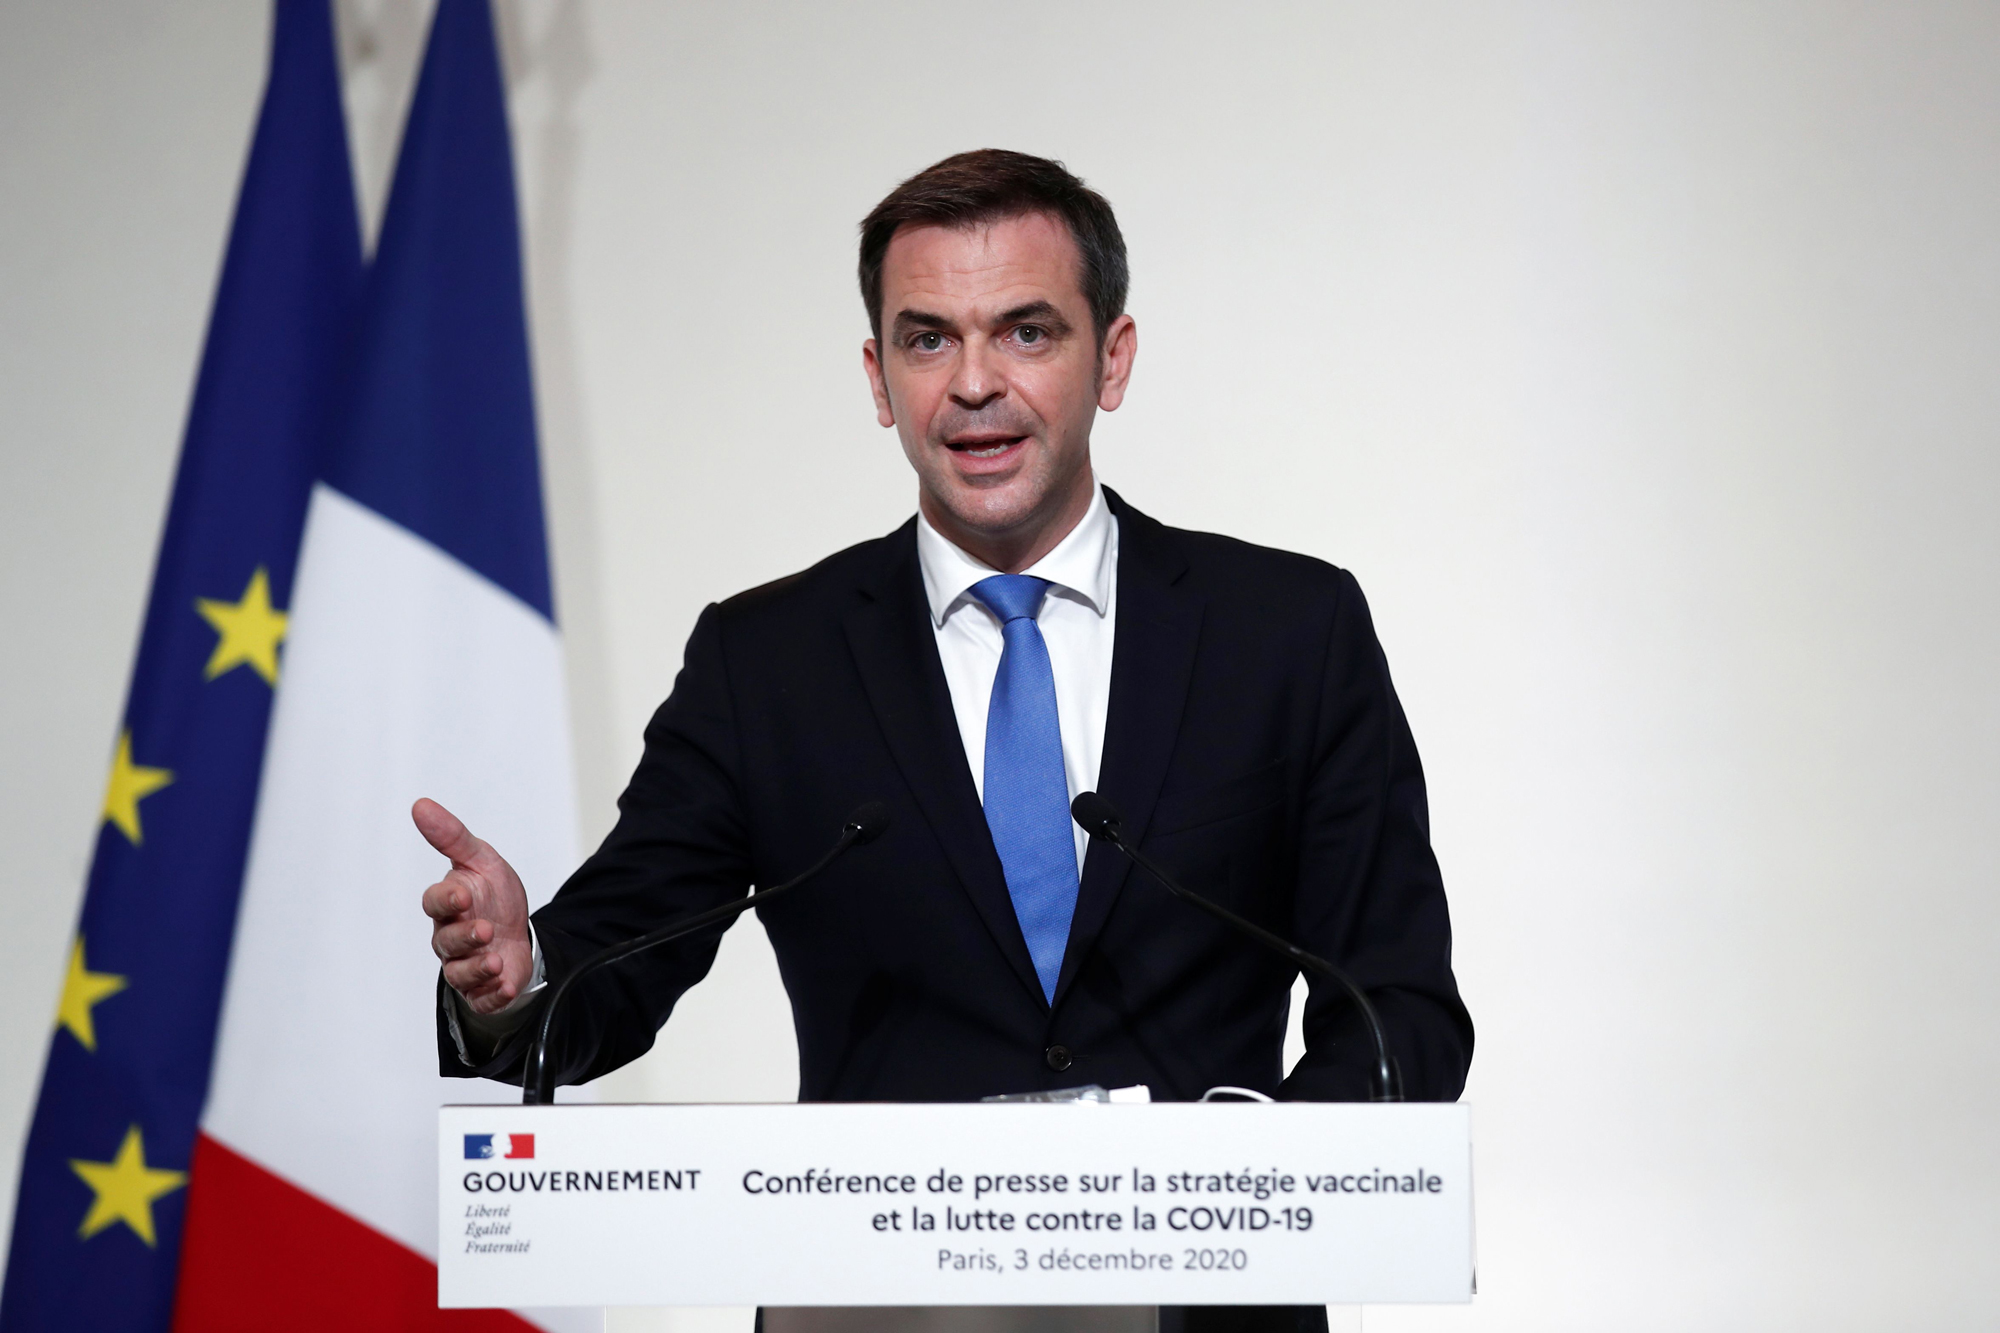 French Health Minister Olivier Veran speaks during a press conference in Paris on December 3.